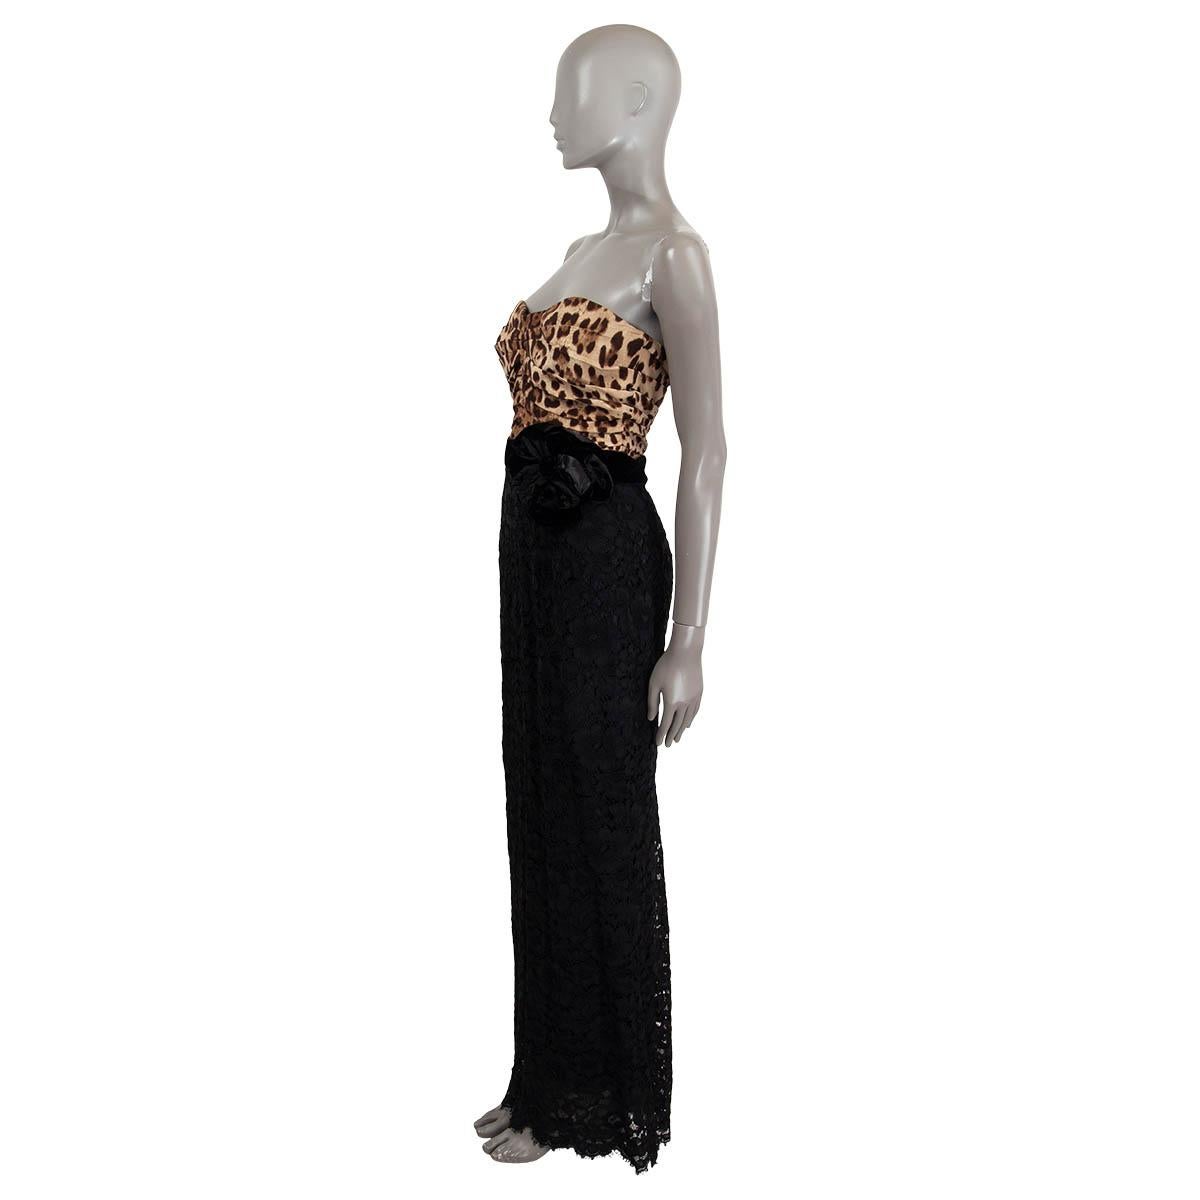 100% authentic Dolce & Gabbana leopard print bustier maxi dress in black, brown and sage rayon (50%), silk (30%), cotton (15%), cupro (3%) and elastane (2%). Features a big satin flower at the waist and a satin belt. Opens with a concealed zipper